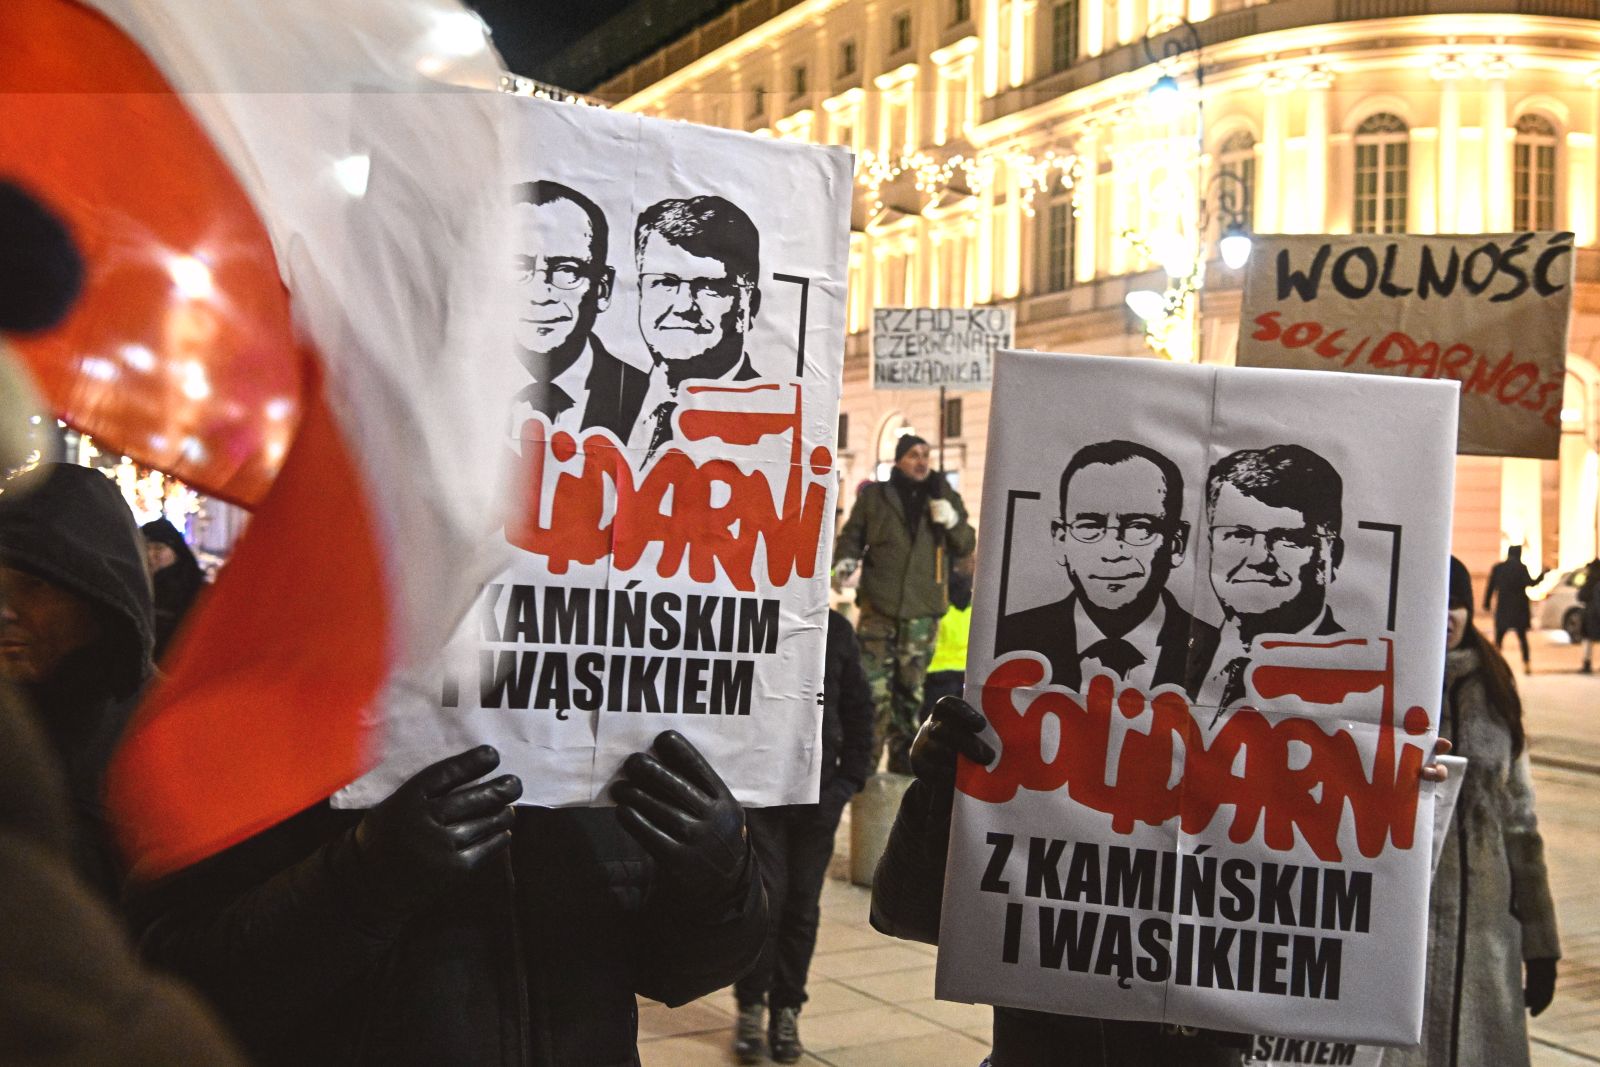 epa11066597 Opposition supporters holds portraits of former Interior Minister Mariusz Kaminski and ex-deputy Interior Minister Maciej Wasik during a protest against the detention of two MPs from the Law and Justice party in front of the Presidential Palace in Warsaw, Poland, 09 January 2024. Opposition politicians have expressed their outrage over the detention of two MPs from the Law and Justice party who have been convicted of abuse of power. Mariusz Kaminski, a former interior minister, and Maciej Wasik, his ex-deputy, were detained by police officers at the Presidential Palace on 09 January evening. In December 2023, Kaminski and Wasik were sentenced to two years in prison for masterminding an anti-corruption provocation in 2007 when they were heading the Central Anti-Corruption Bureau (CBA). Earlier on 09 January, the police received documents containing an order issued by a Warsaw court to take both politicians into custody. 'In the Tusk-owned state, Civic Platform politicians charged with corruption are free, either in the Sejm, the lower house of parliament, or in the European Parliament,' Mariusz Blaszczak, the head of the Law and Justice (PiS) parliamentary caucus, wrote. ' And PiS politicians, who have been fighting against corruption during their entire political careers, are being sent to prison,' Blaszczak continued, adding that both politicians had been pardoned by the president and were still MPs.  EPA/Radek Pietruszka POLAND OUT